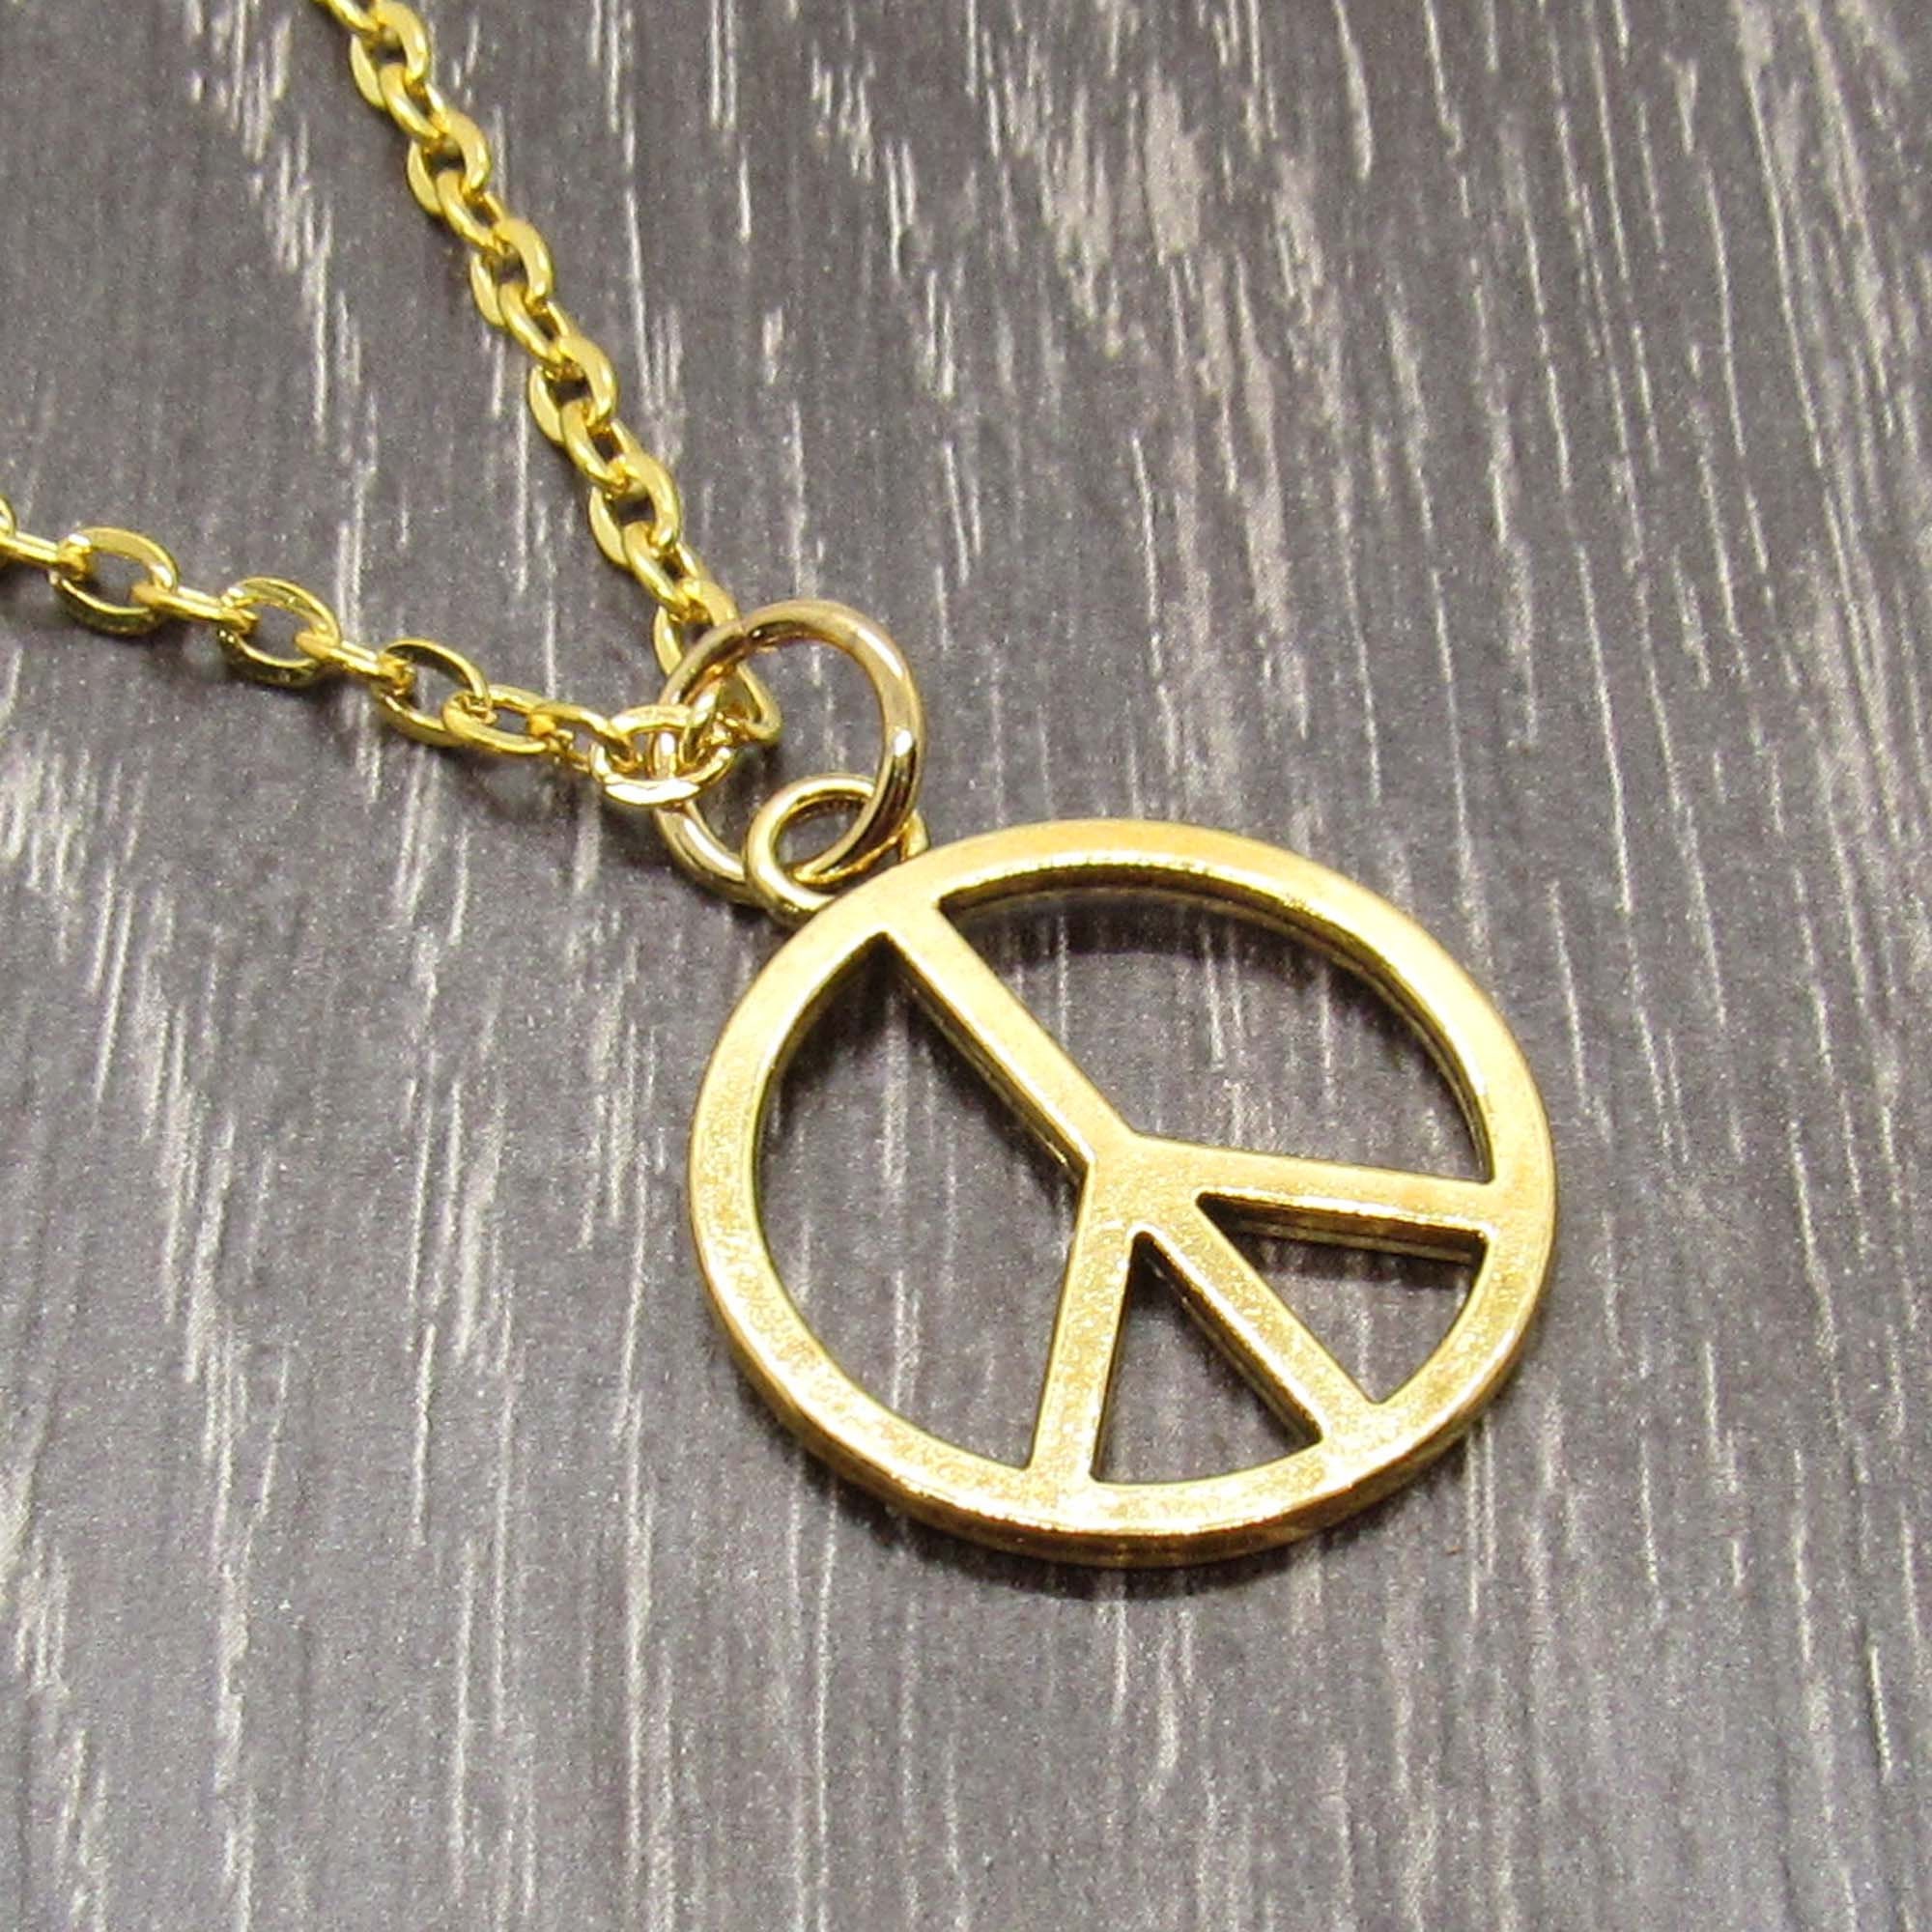 NEW Men's Peace Sign Dog Tag Necklace – Robert Manse Designs